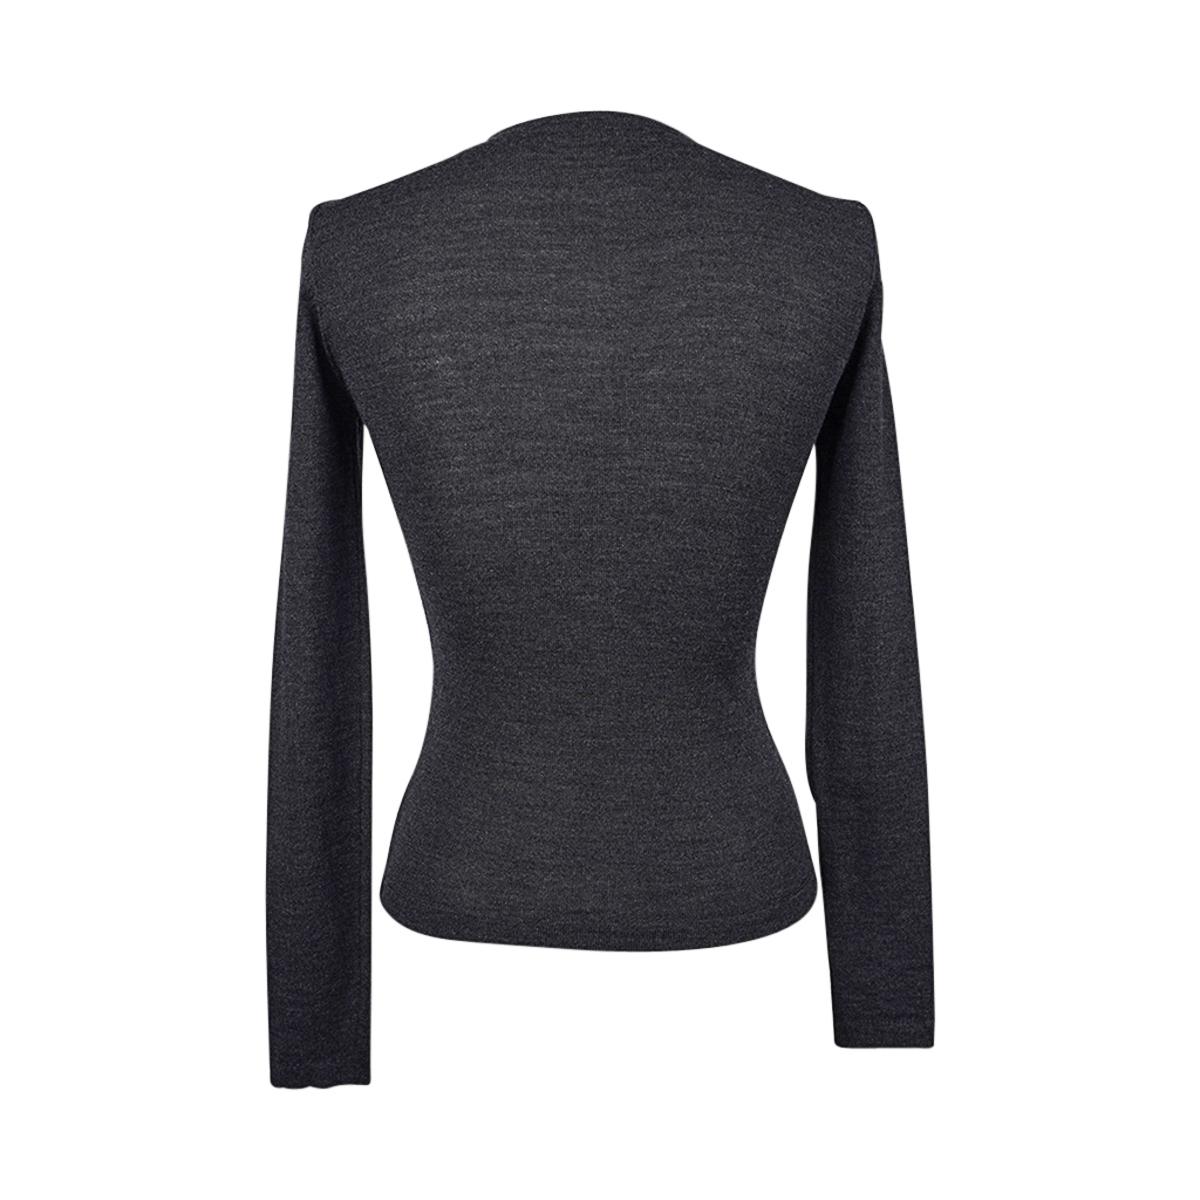 Mugler Vintage Charcoal Gray Knit Top Classic S For Sale 5